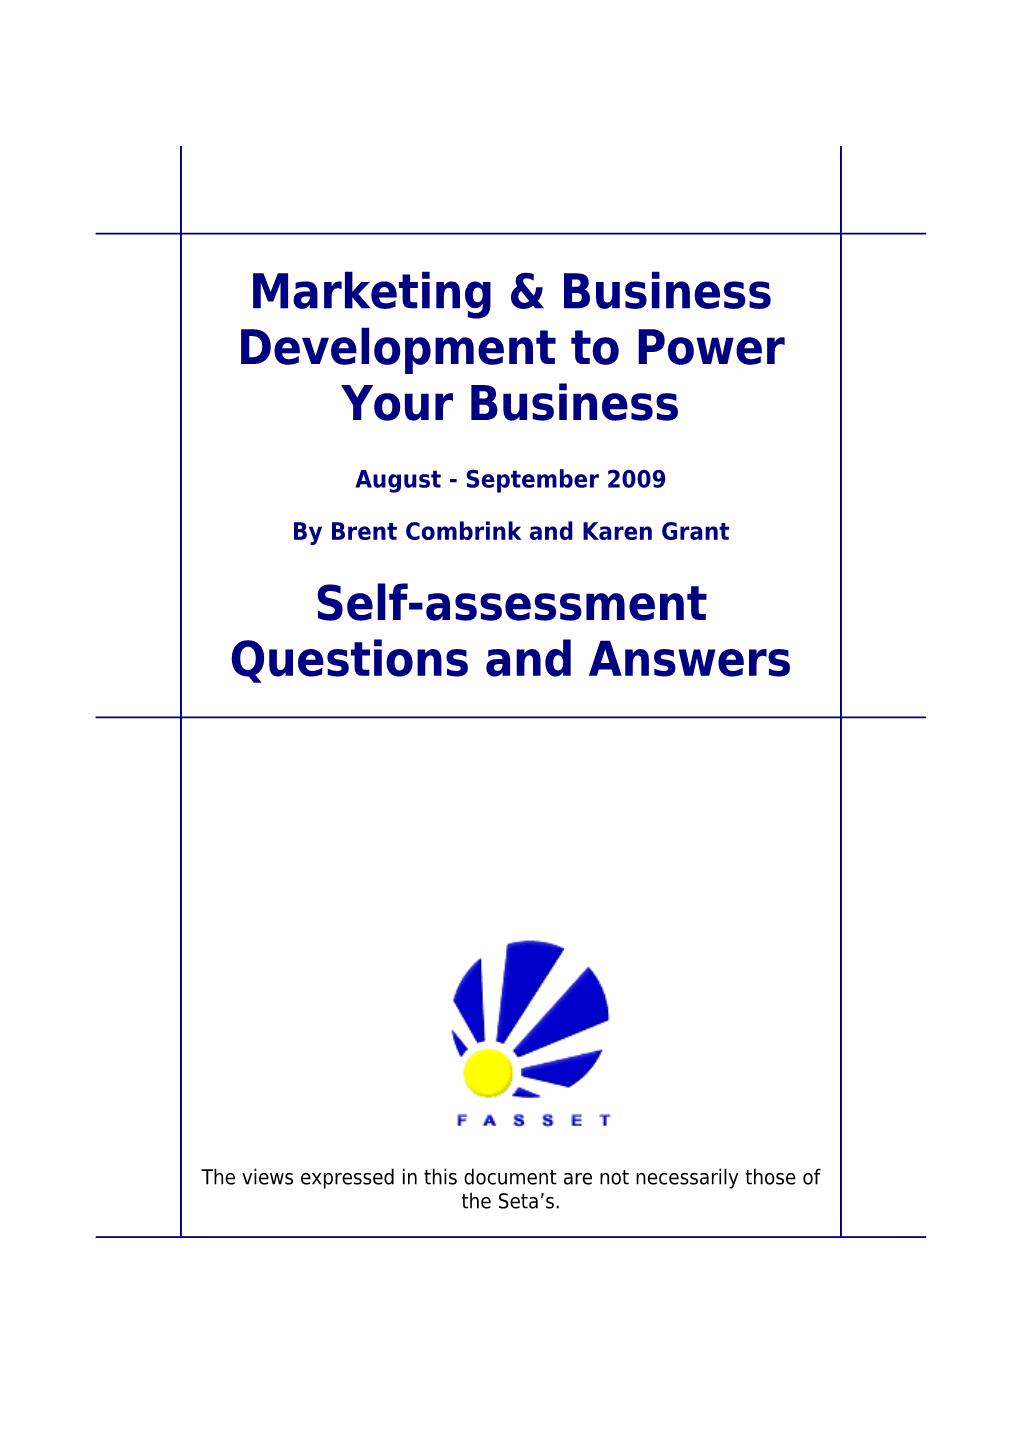 Marketing & Business Development to Power Your Business